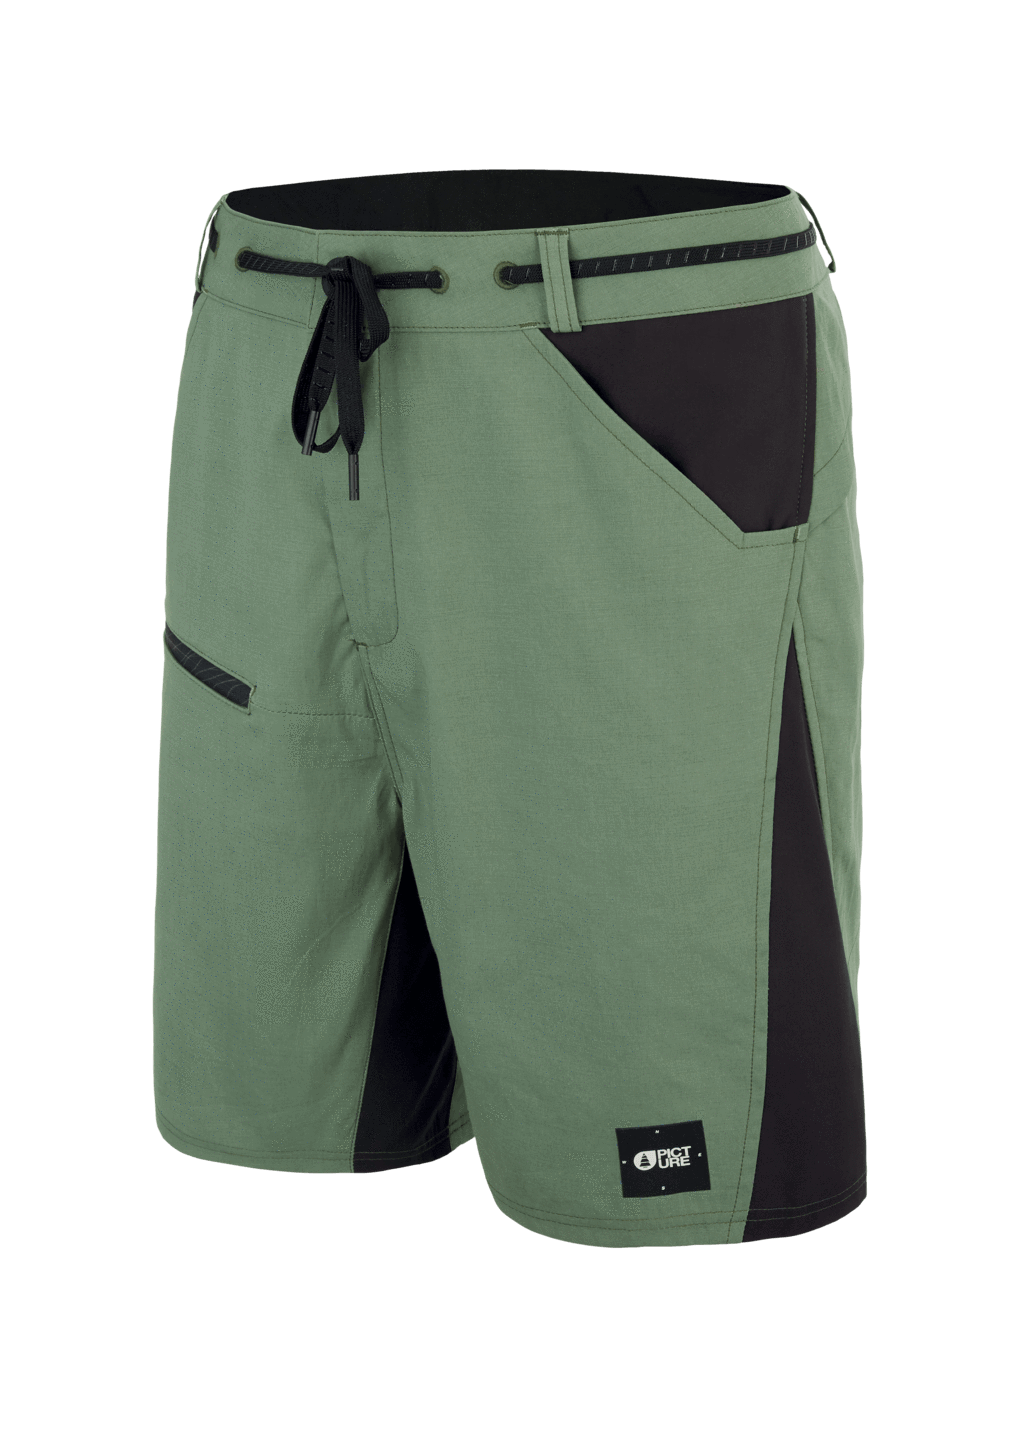 Picture Organic Men's Robust Short - Polyester, Army Green / 31